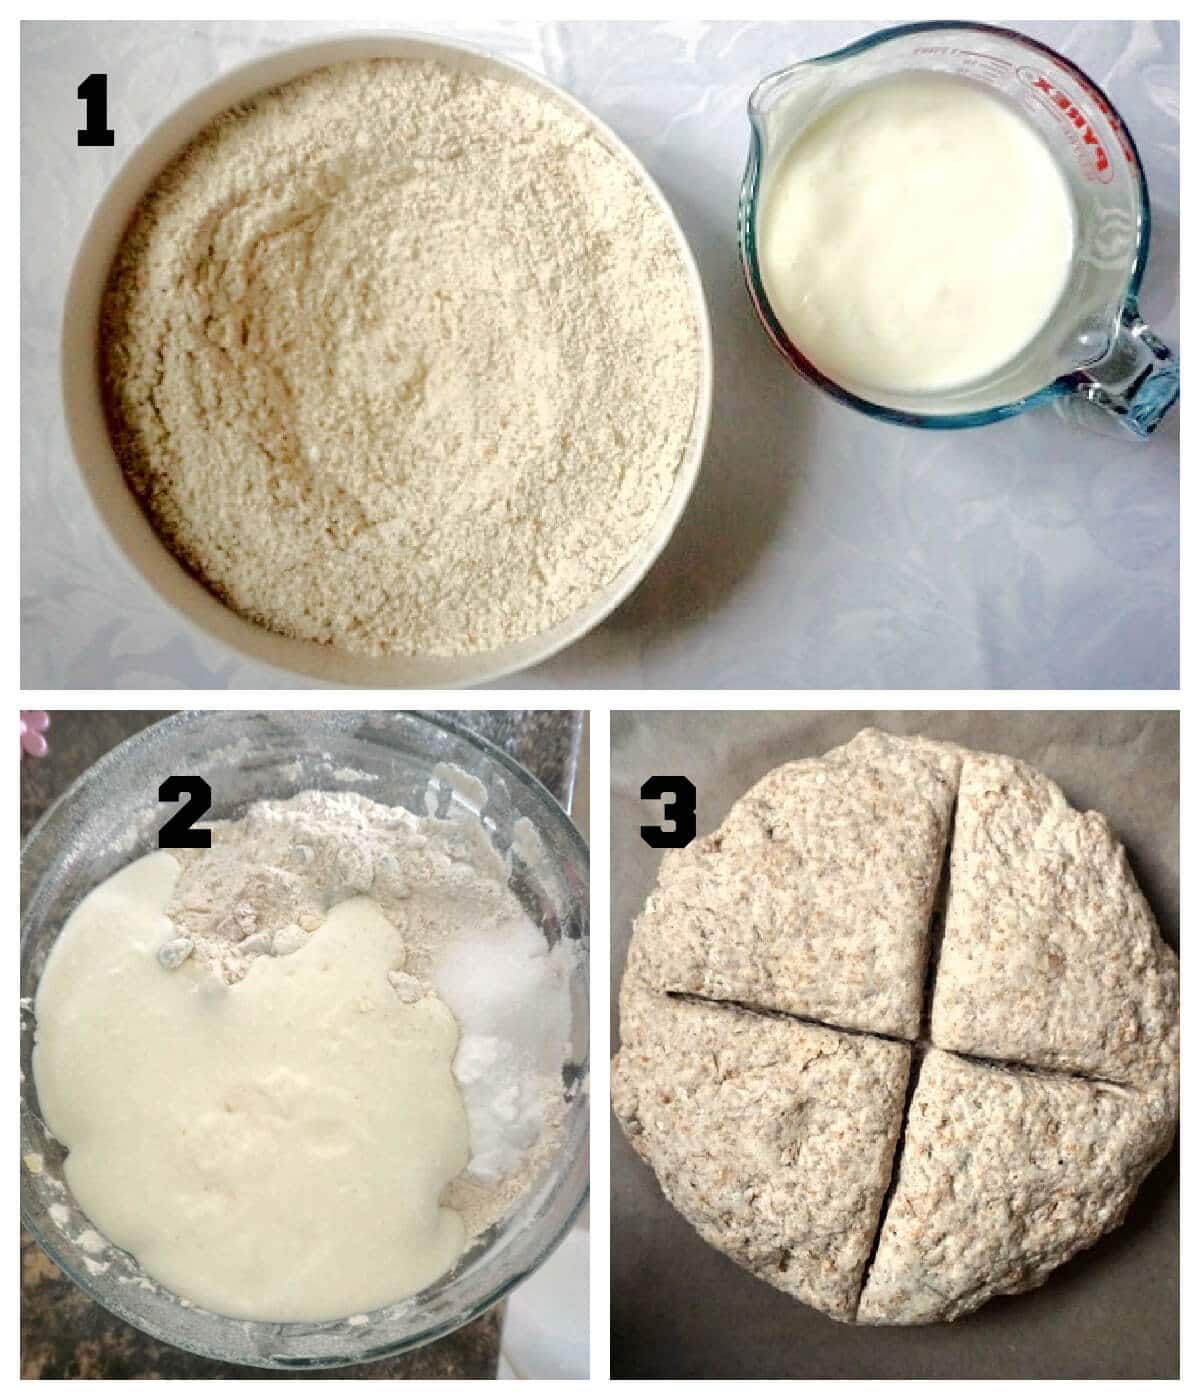 Collage of 3 photos to show how to make soda bread.